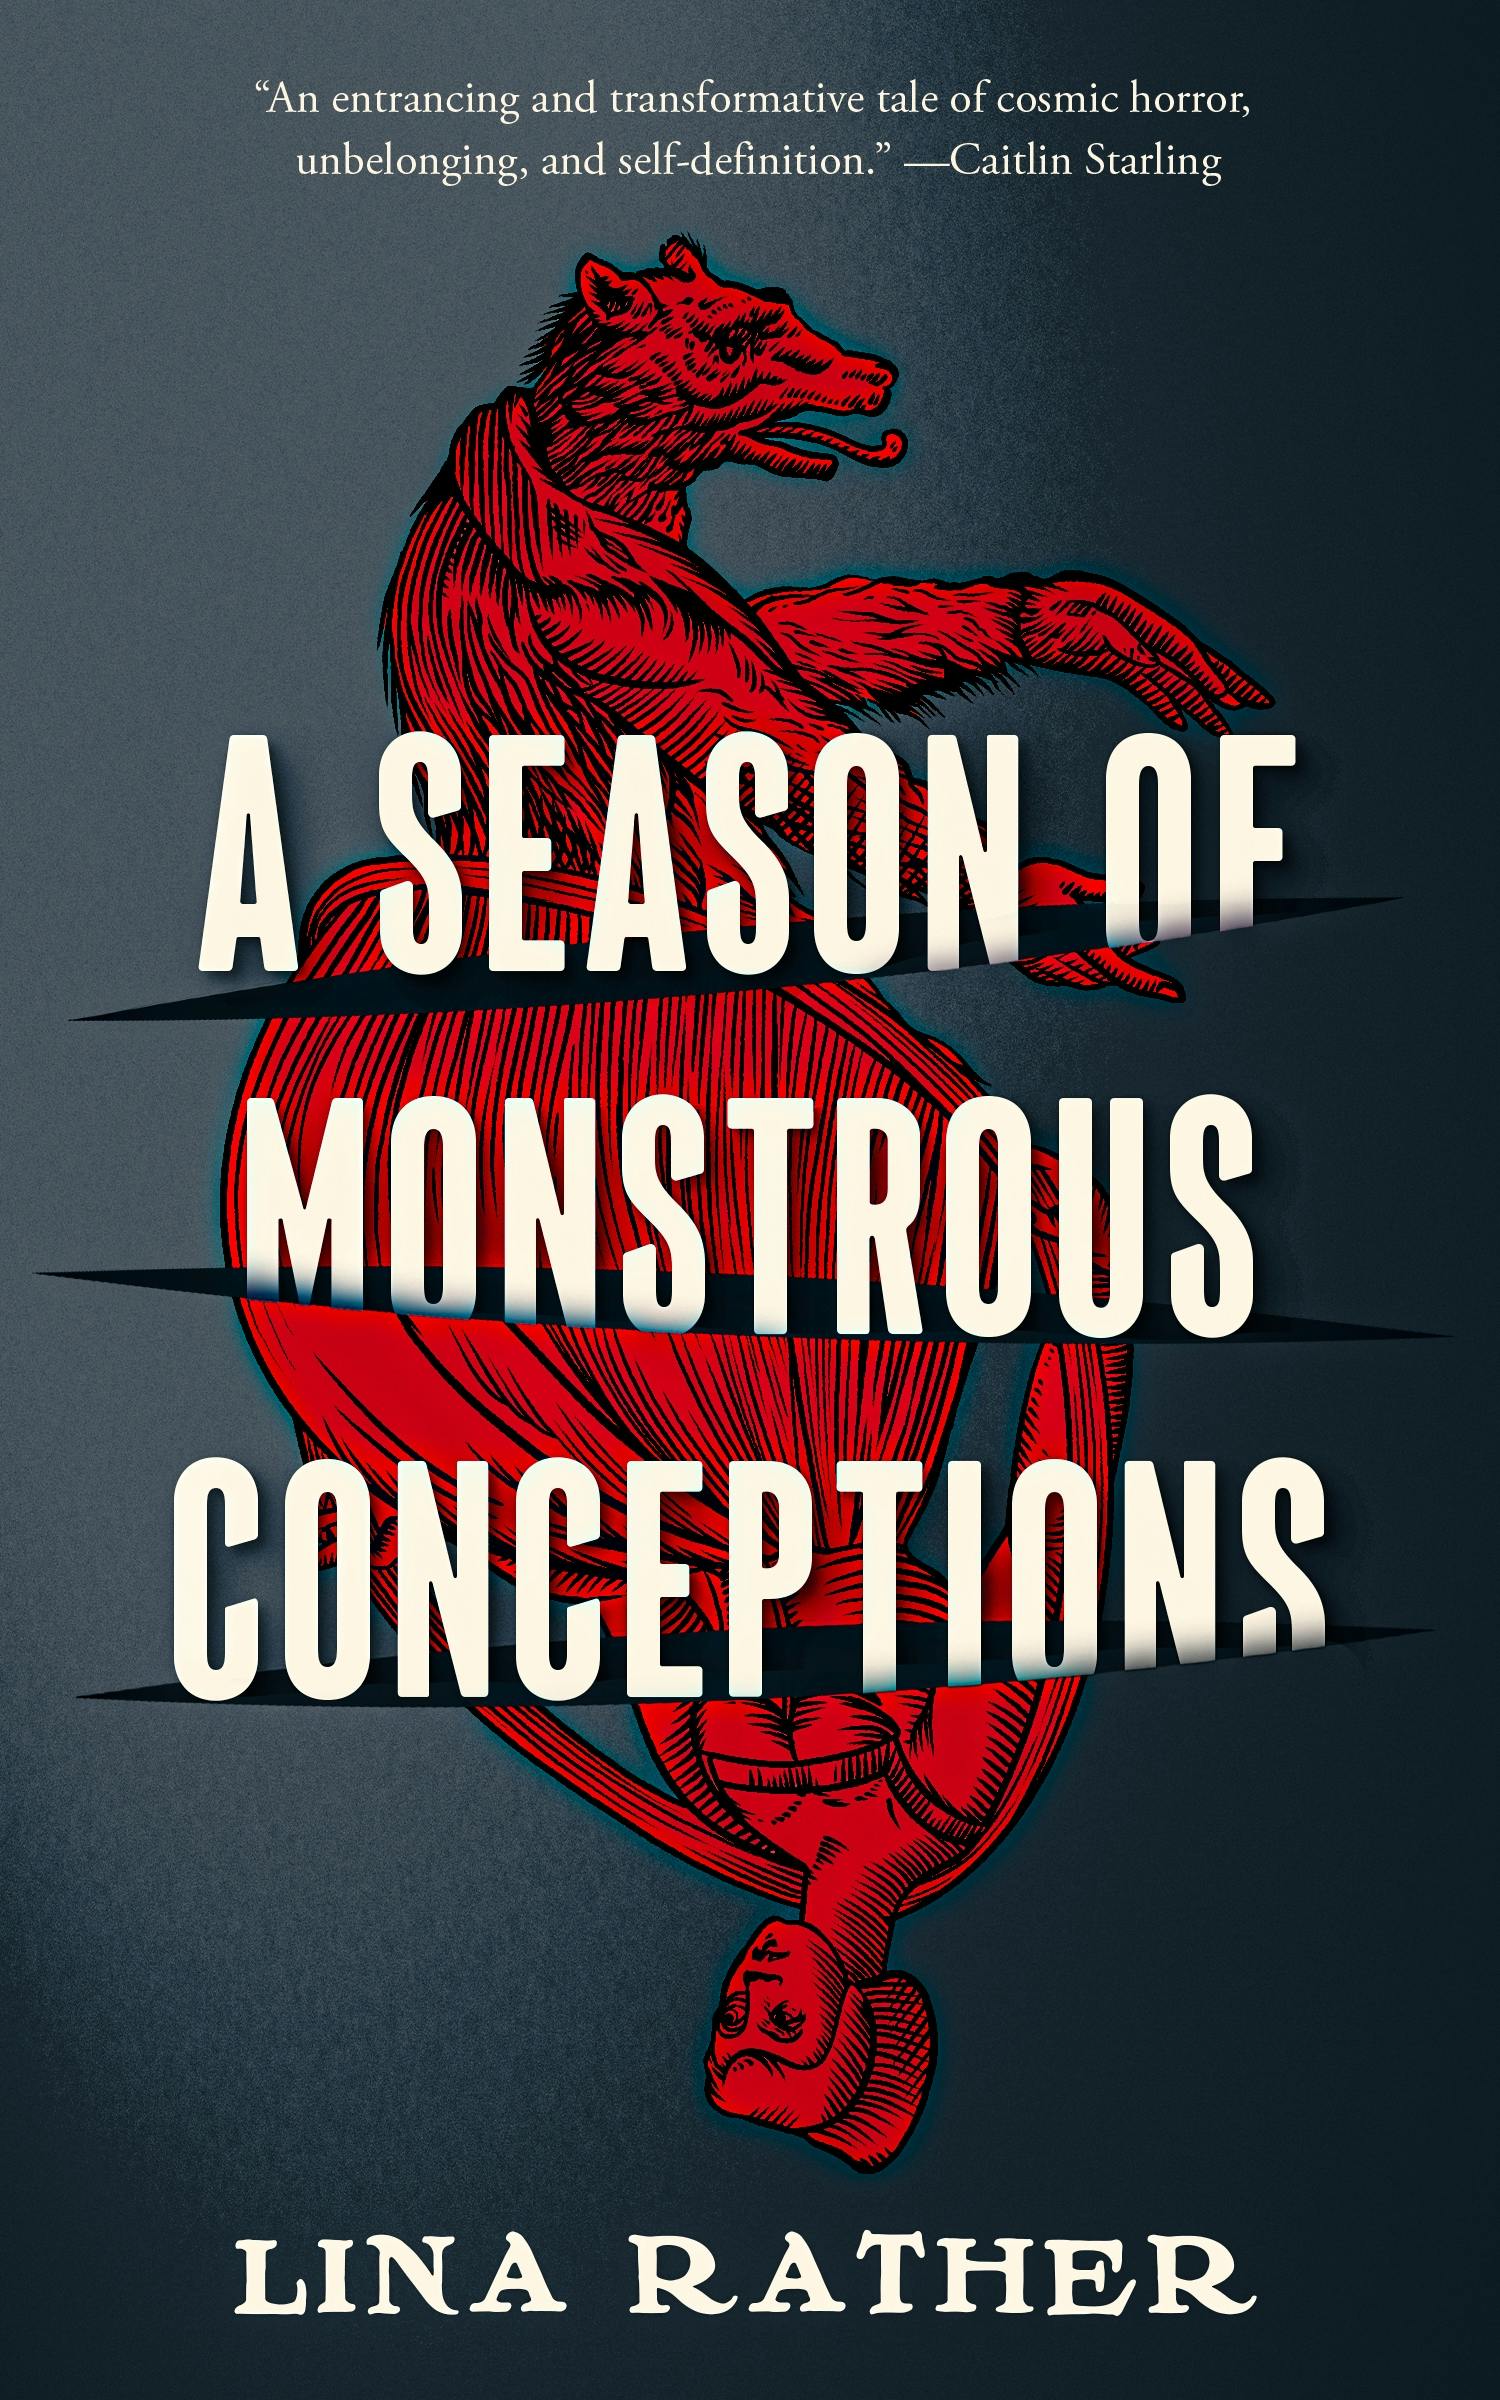 Cover for the book titled as: A Season of Monstrous Conceptions